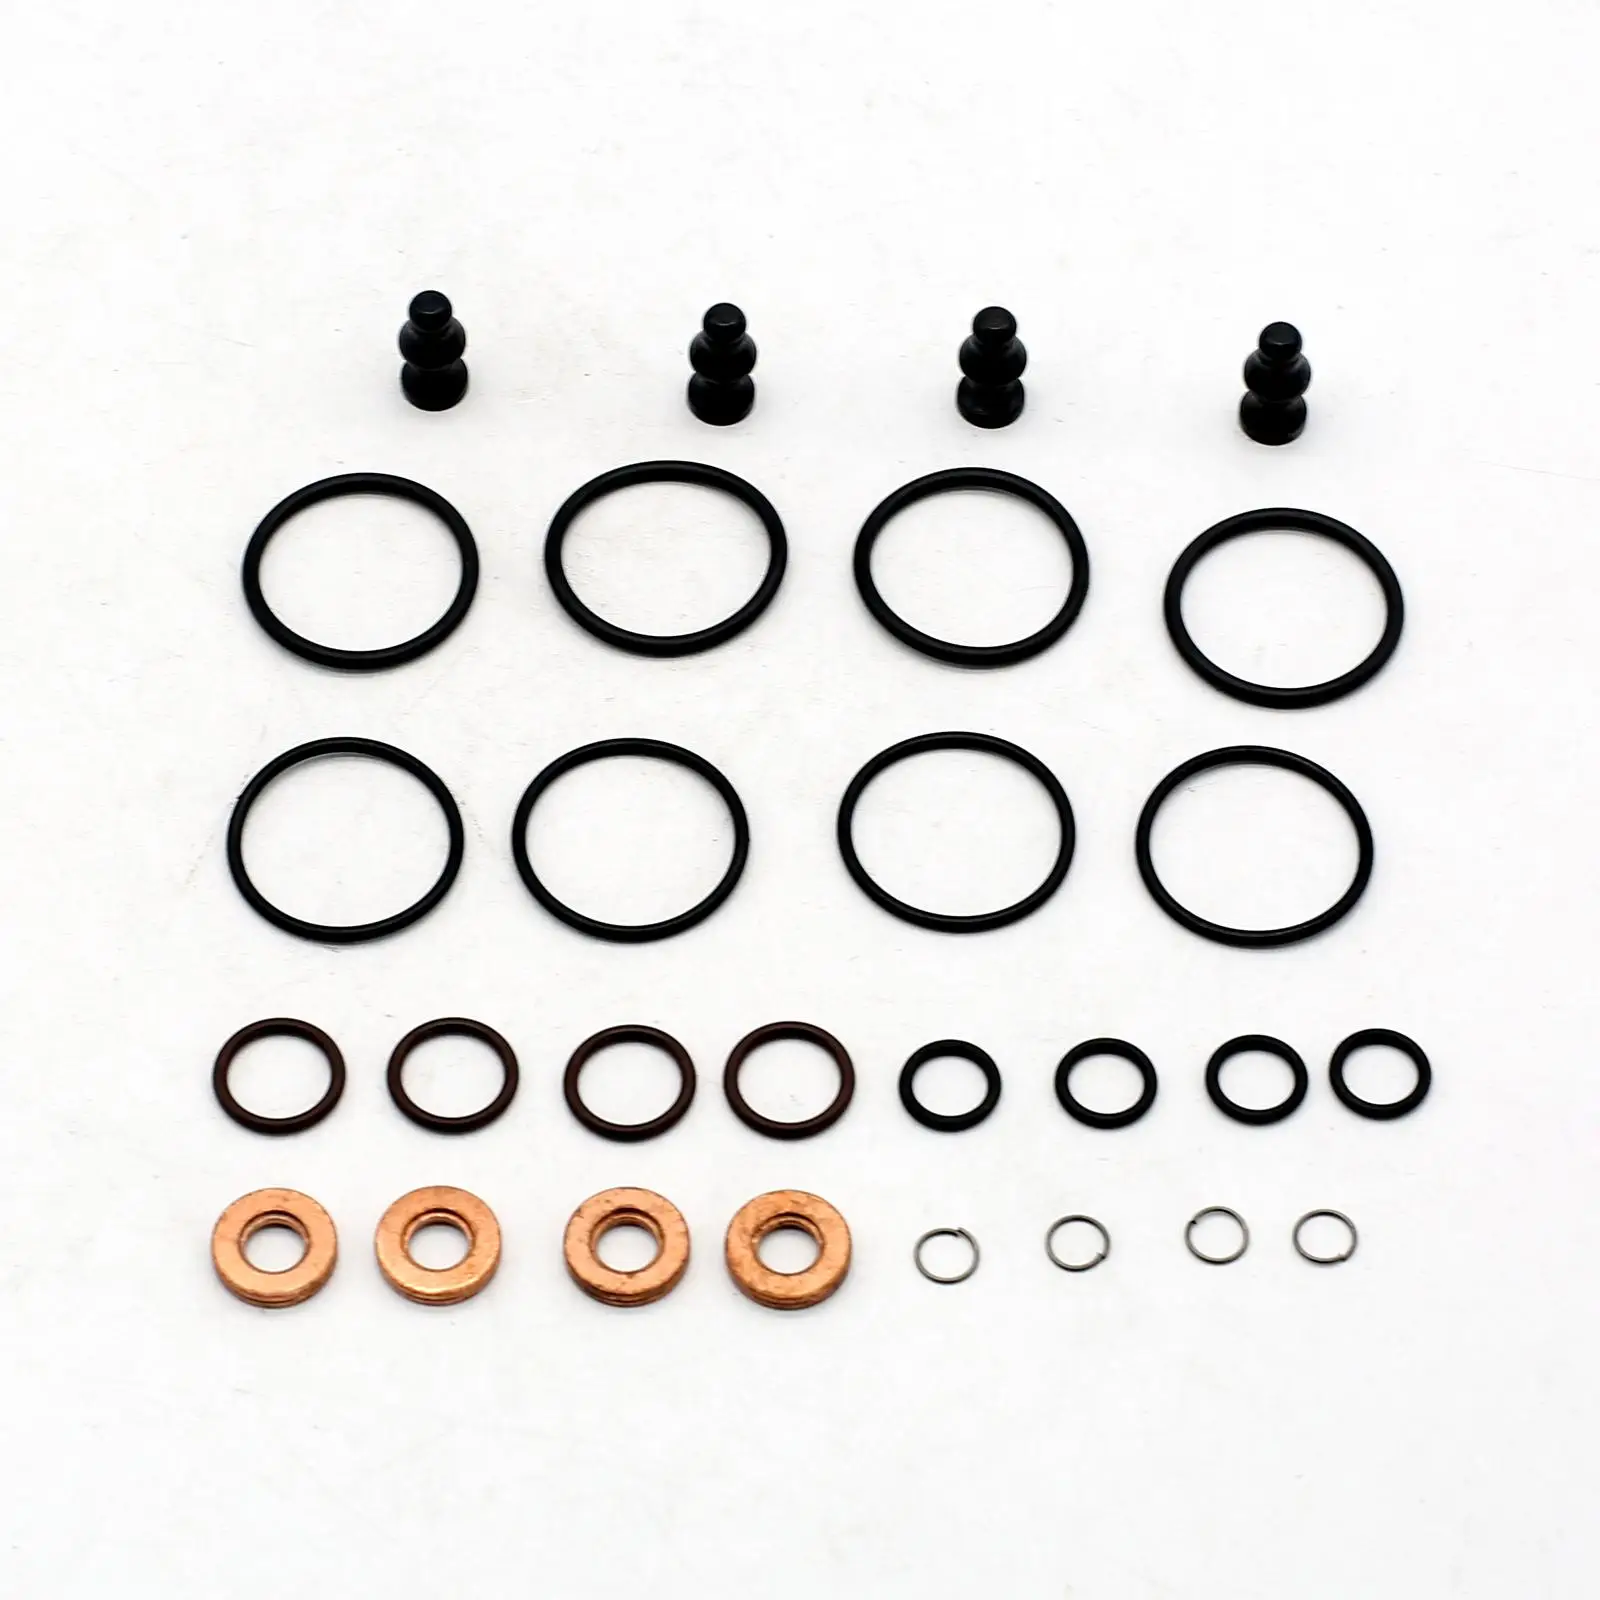 Automobile Engine Fuel System Pump Seal O Rings + Washer Shim Gasket Repair Kit Full Set Replacement for Bosch